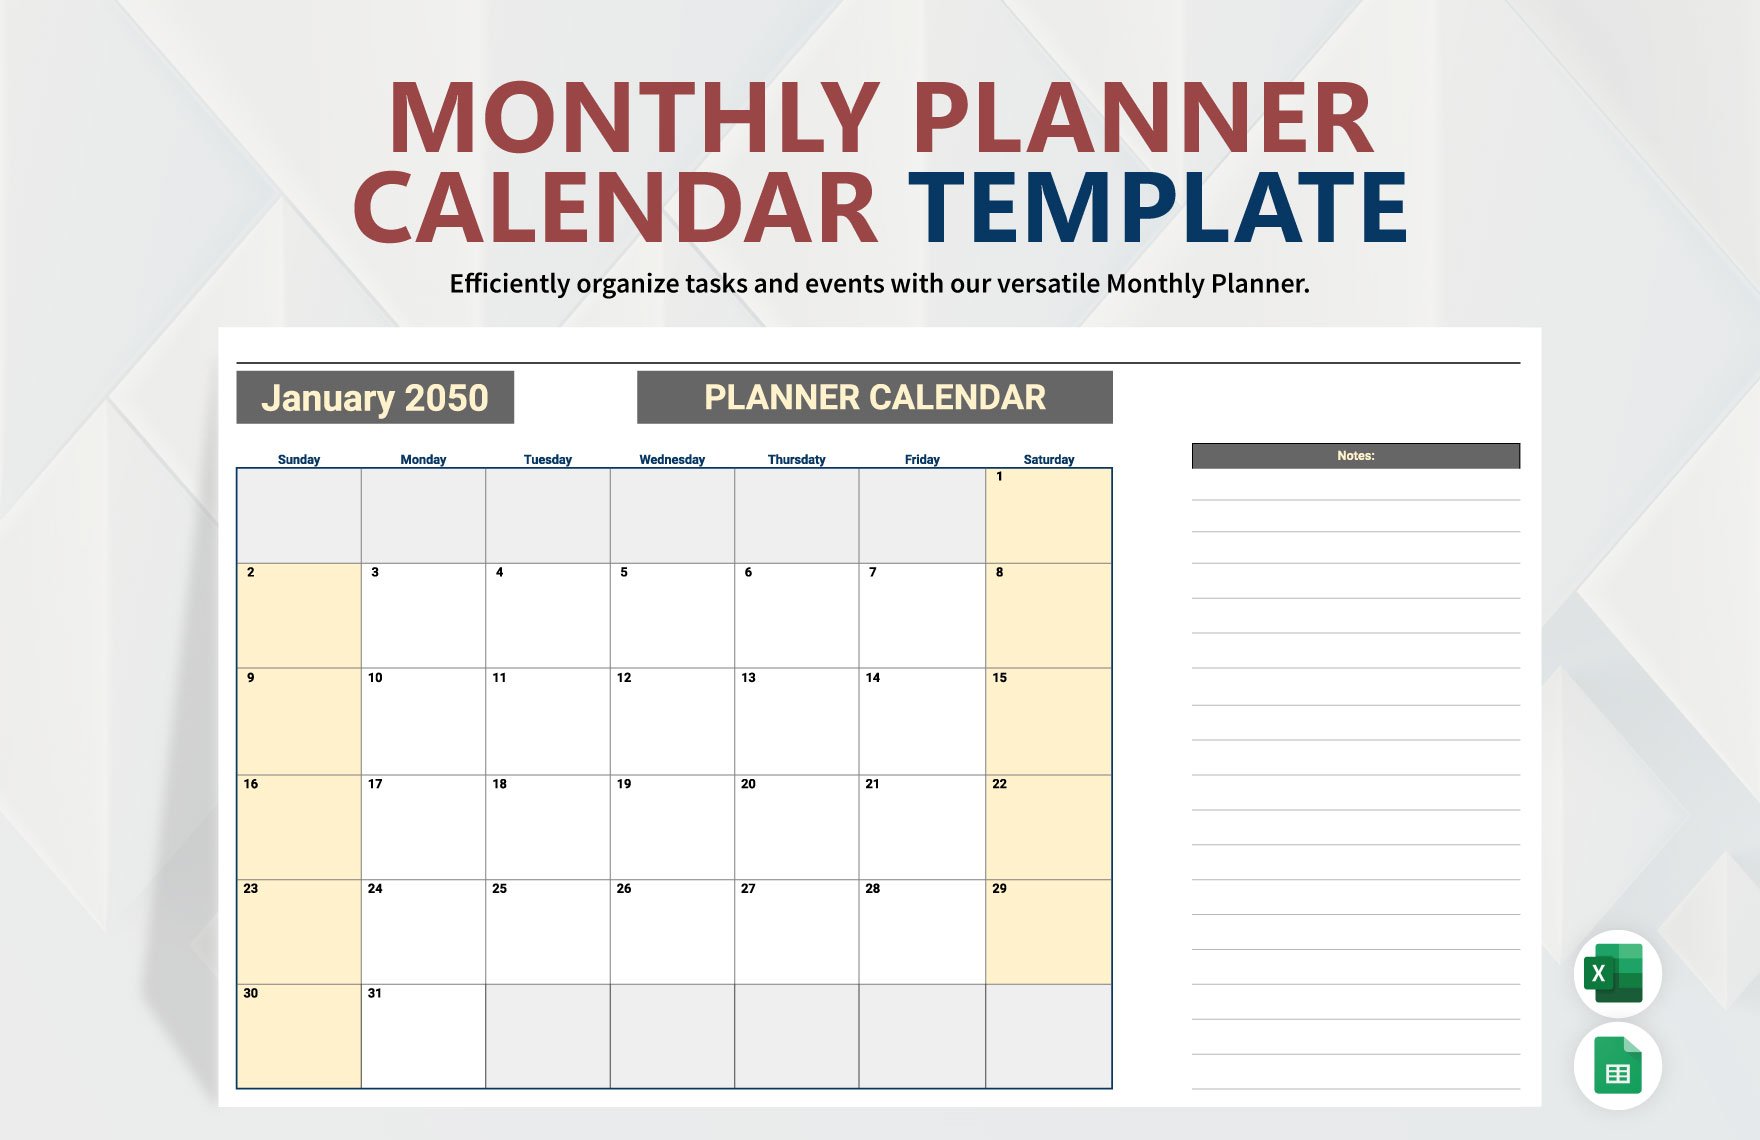 Monthly Planner Calendar Template in Excel, Google Sheets